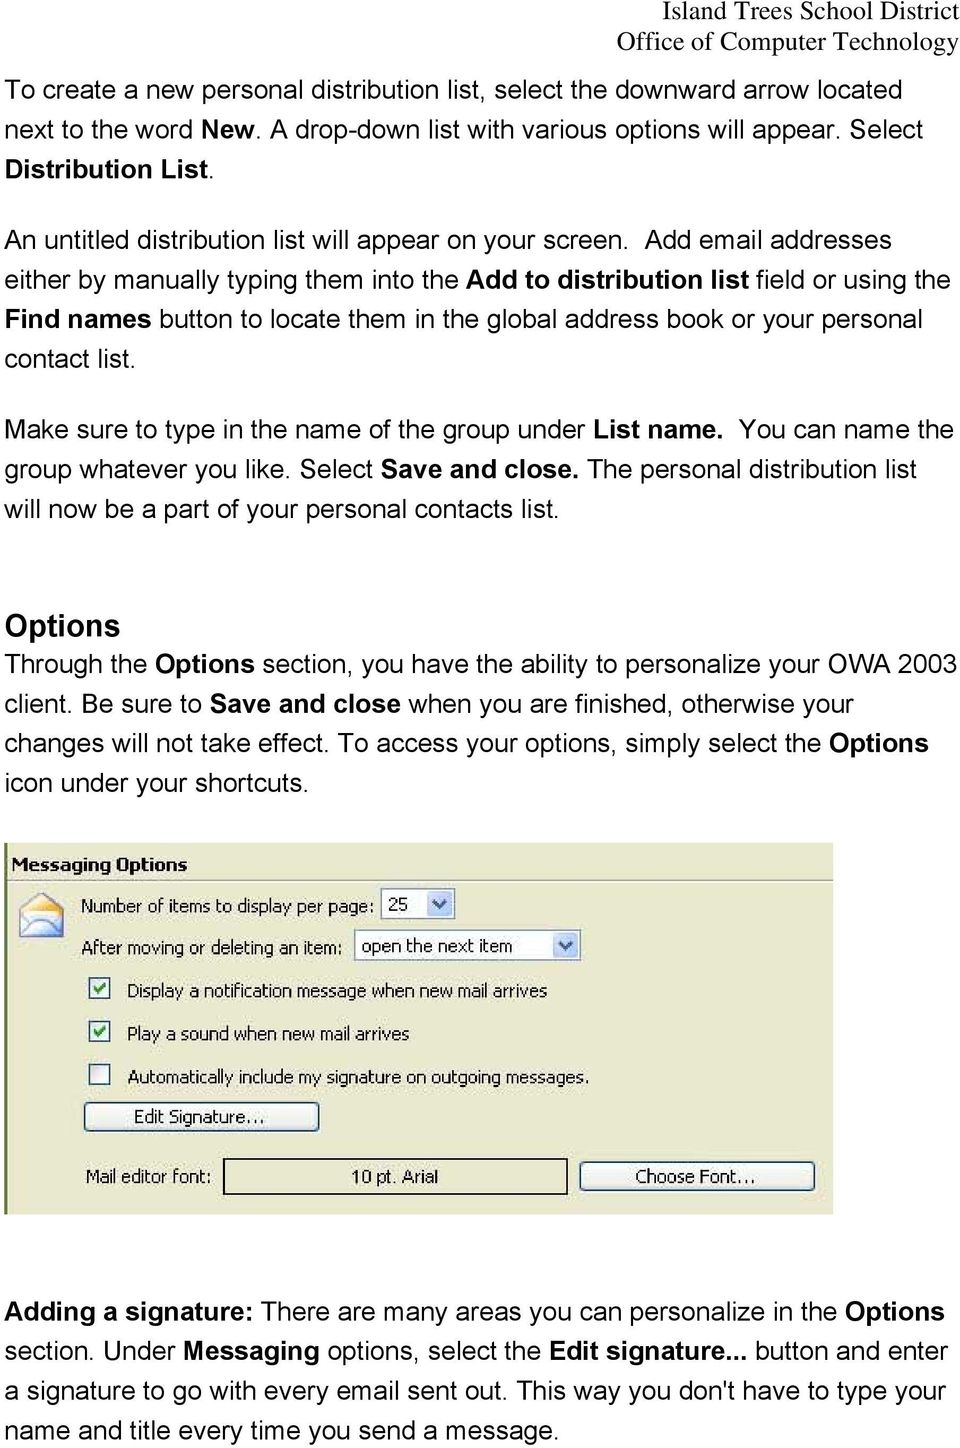 Add email addresses either by manually typing them into the Add to distribution list field or using the Find names button to locate them in the global address book or your personal contact list.